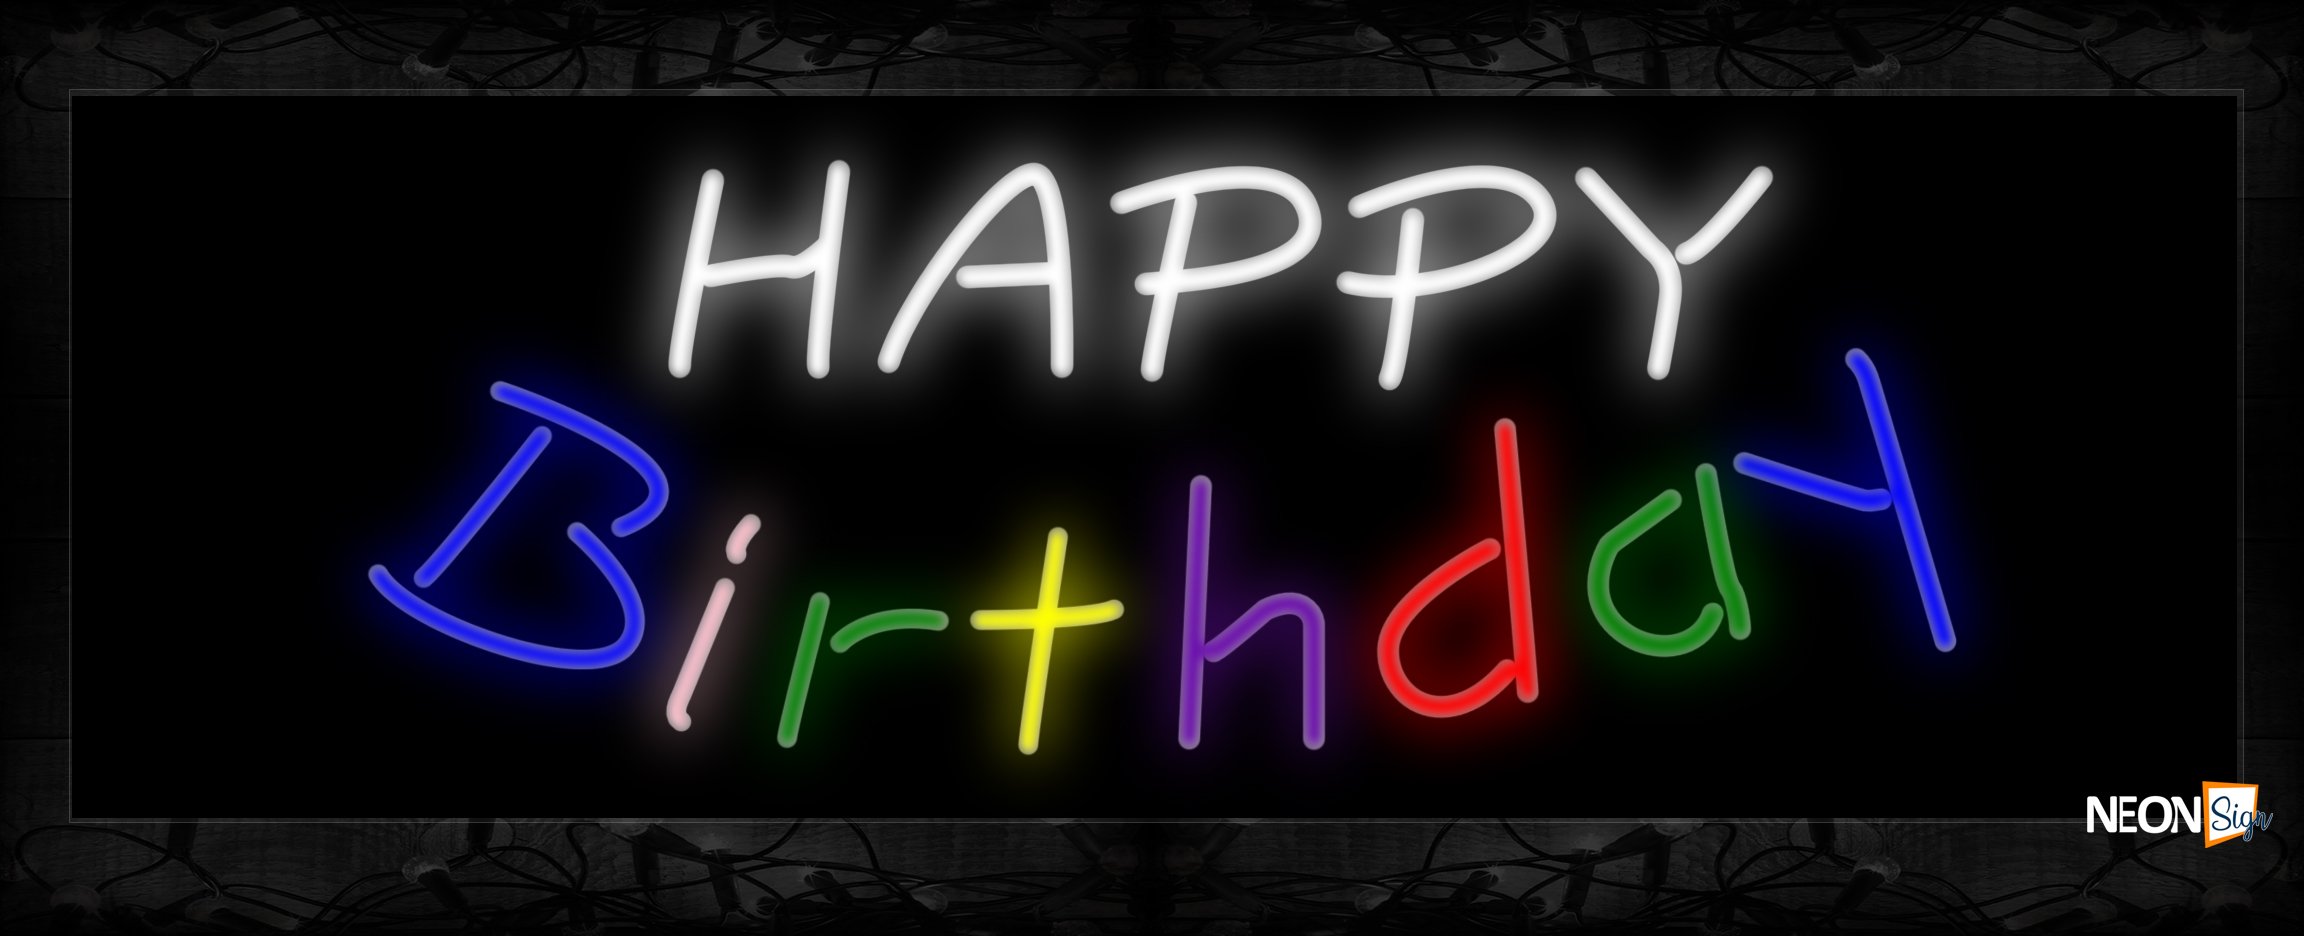 Image of 10249 Happy Birthday (Colorful) Neon Sign 13x32 Black Backing